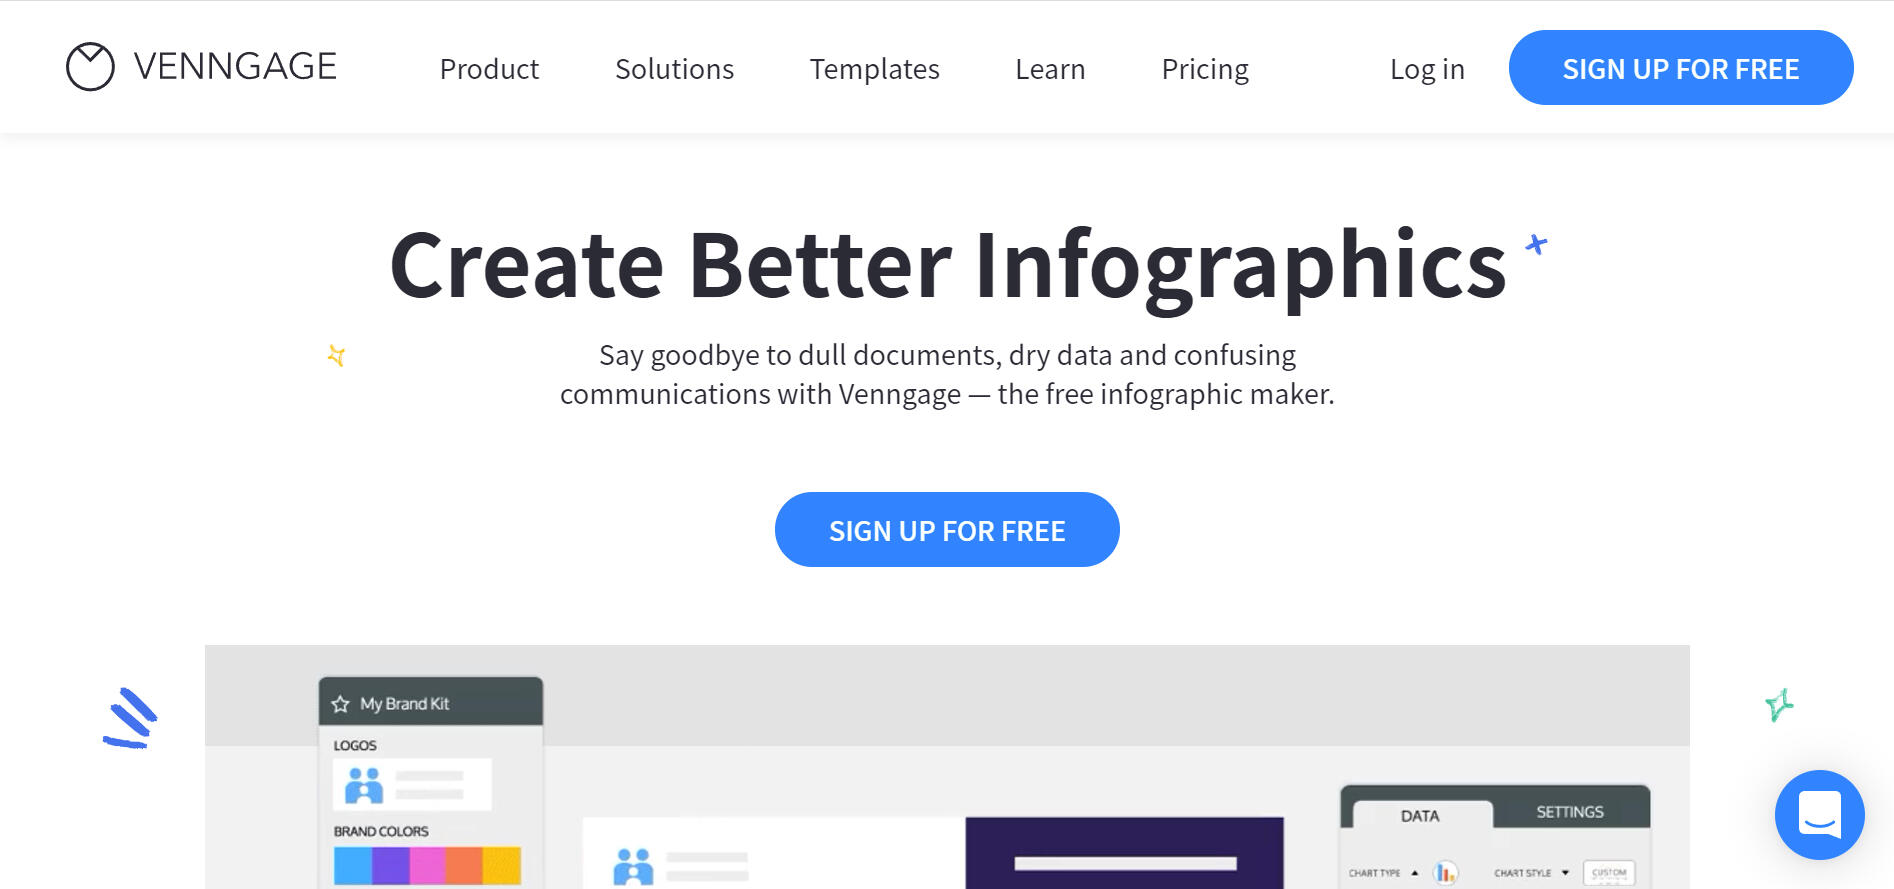 Venngage — Spanish translation and copywriting of Website, Blog and Email Newsletters